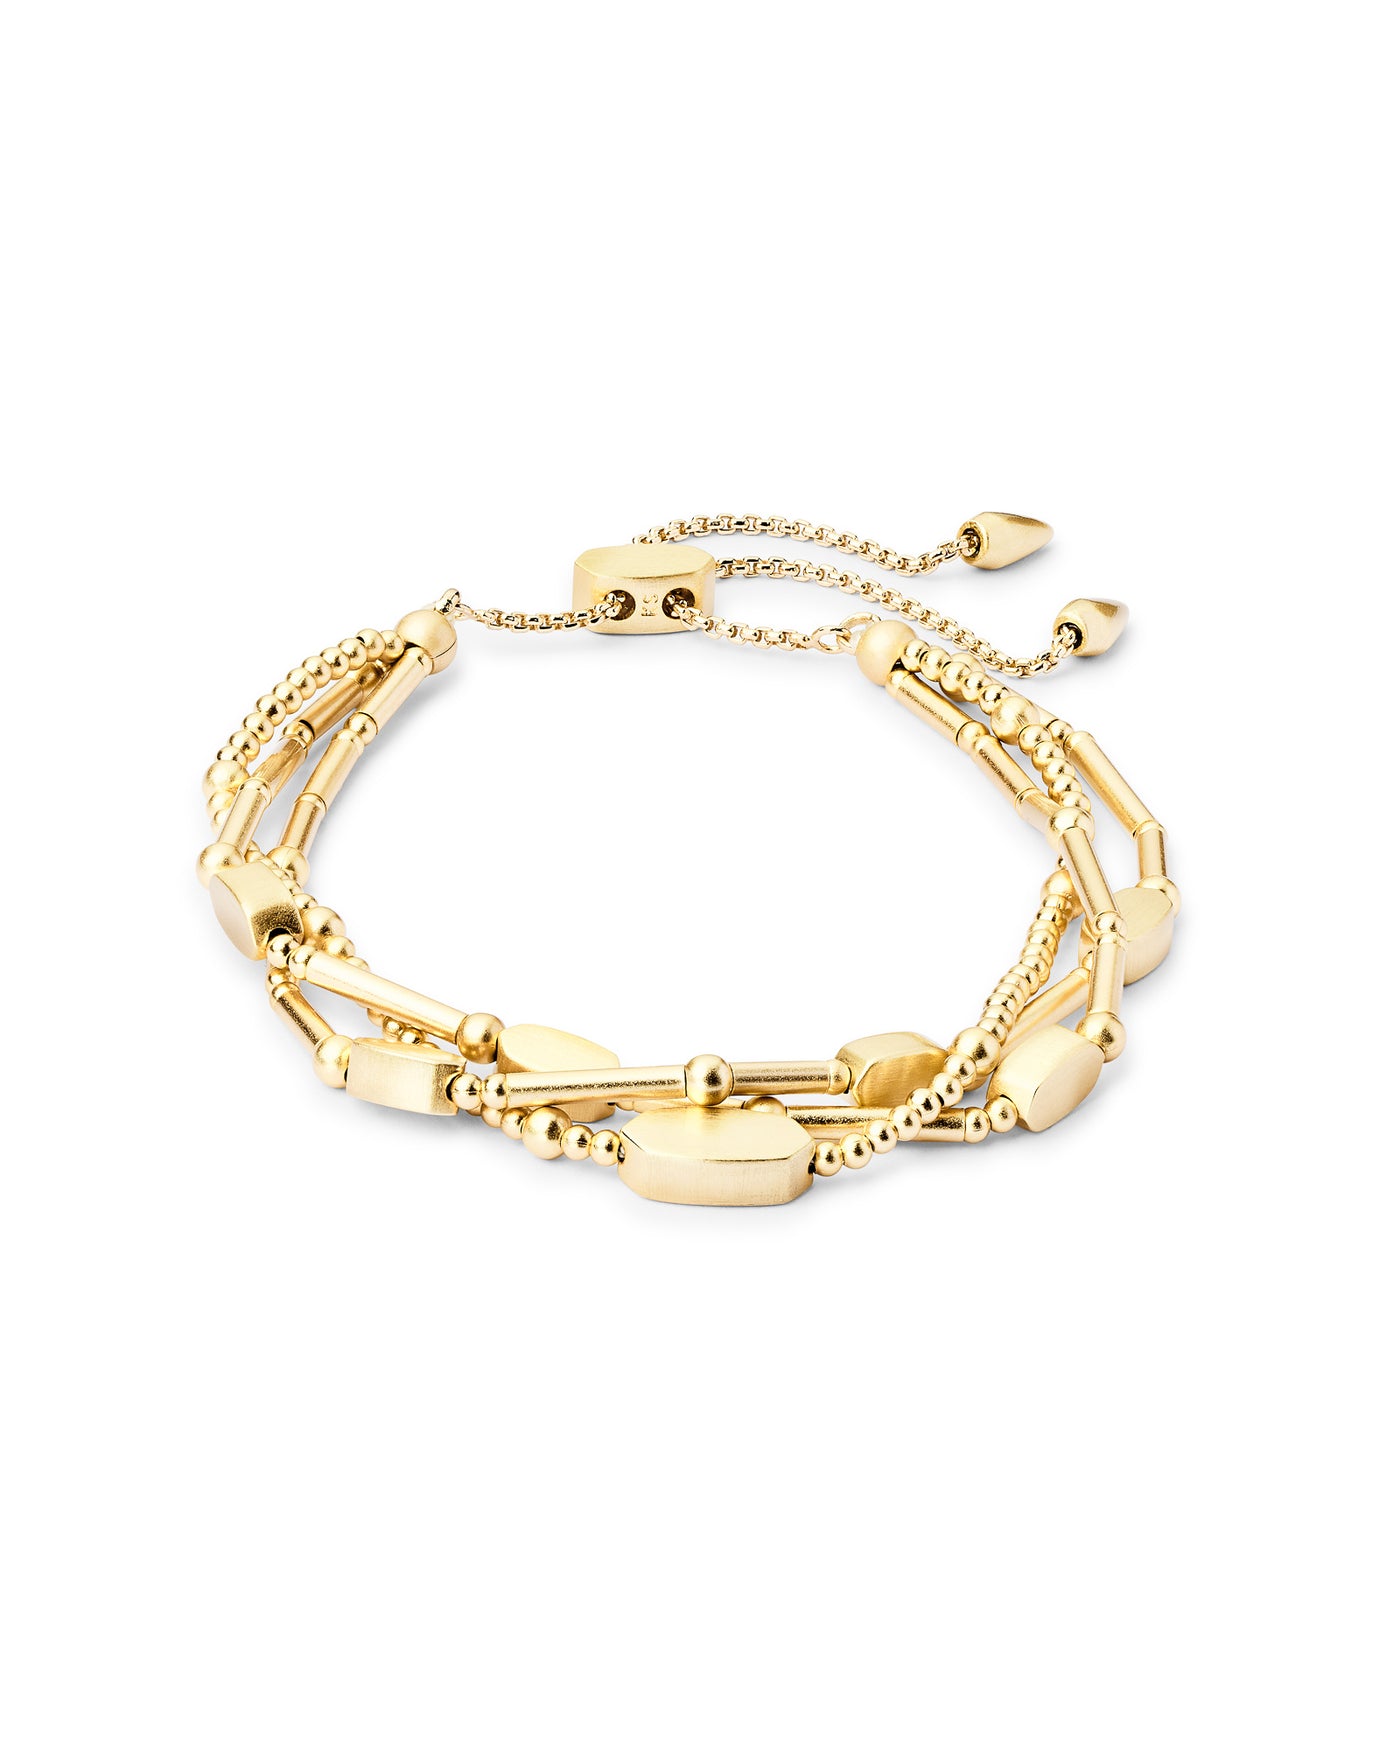 Kendra Scott Chantal Bracelet Gold Metal-Bracelets-Kendra Scott-Market Street Nest, Fashionable Clothing, Shoes and Home Décor Located in Mabank, TX